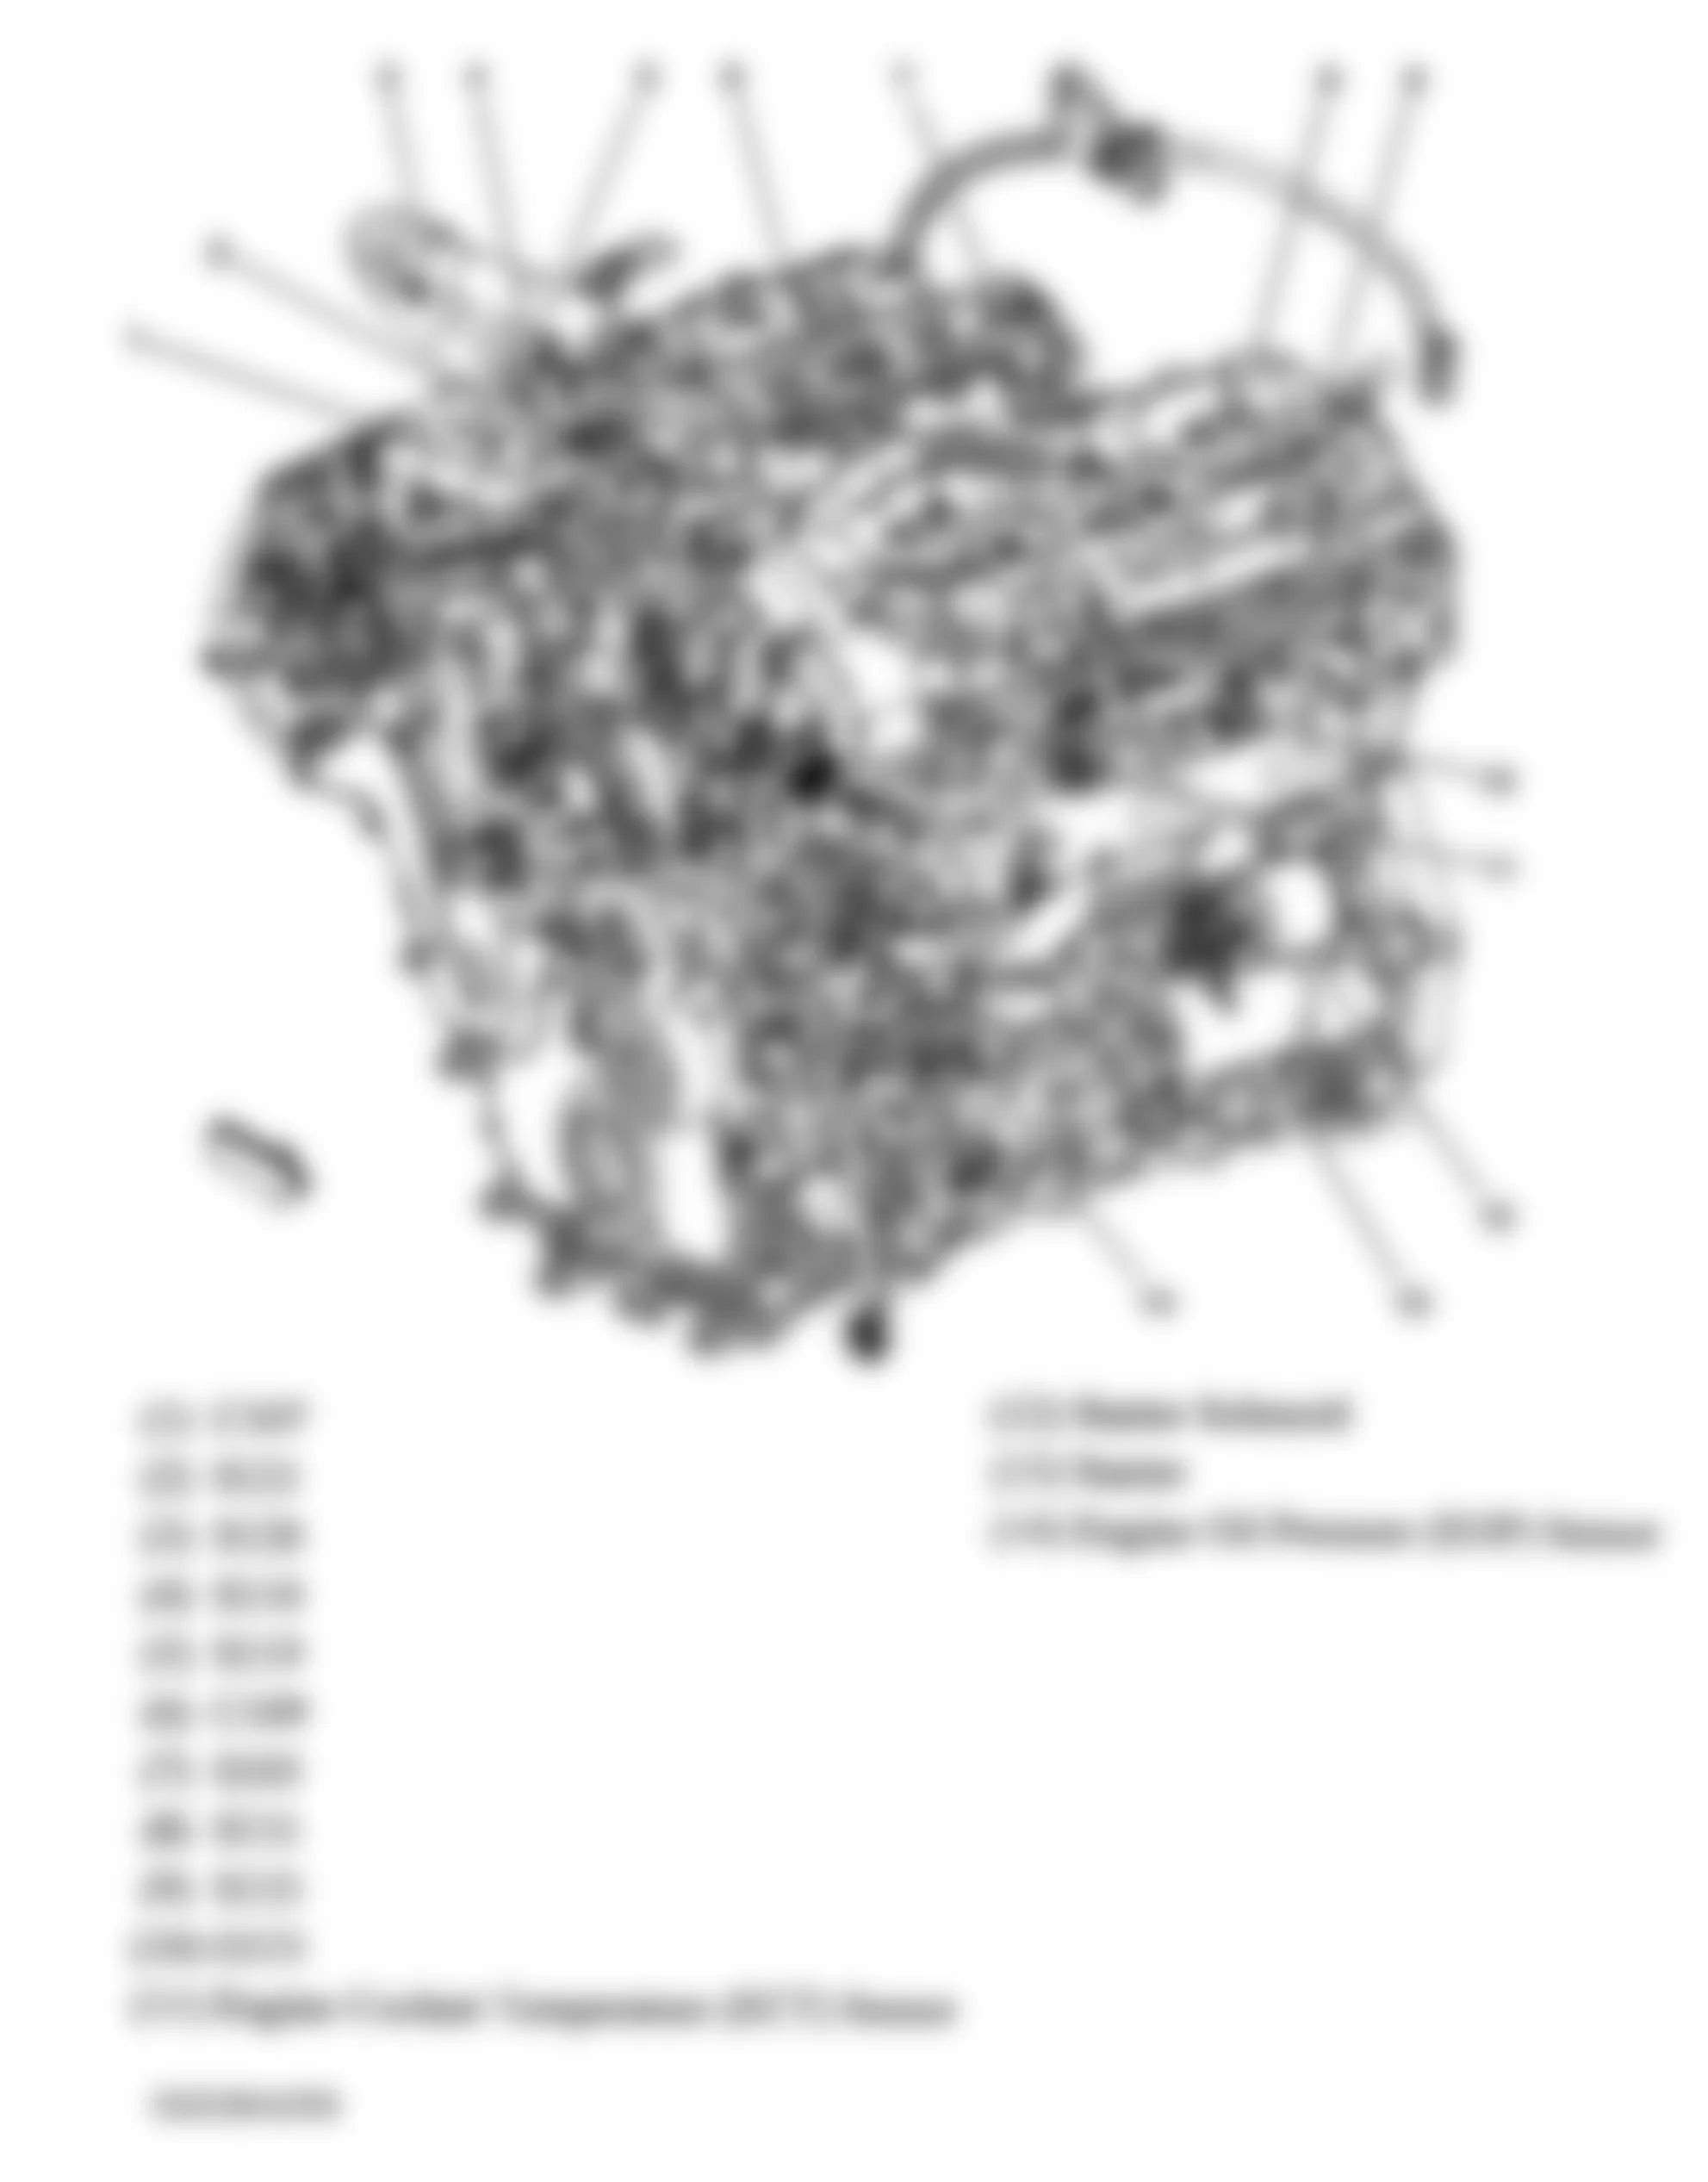 Buick LaCrosse CXL 2006 - Component Locations -  Front Of Engine (3.6L)